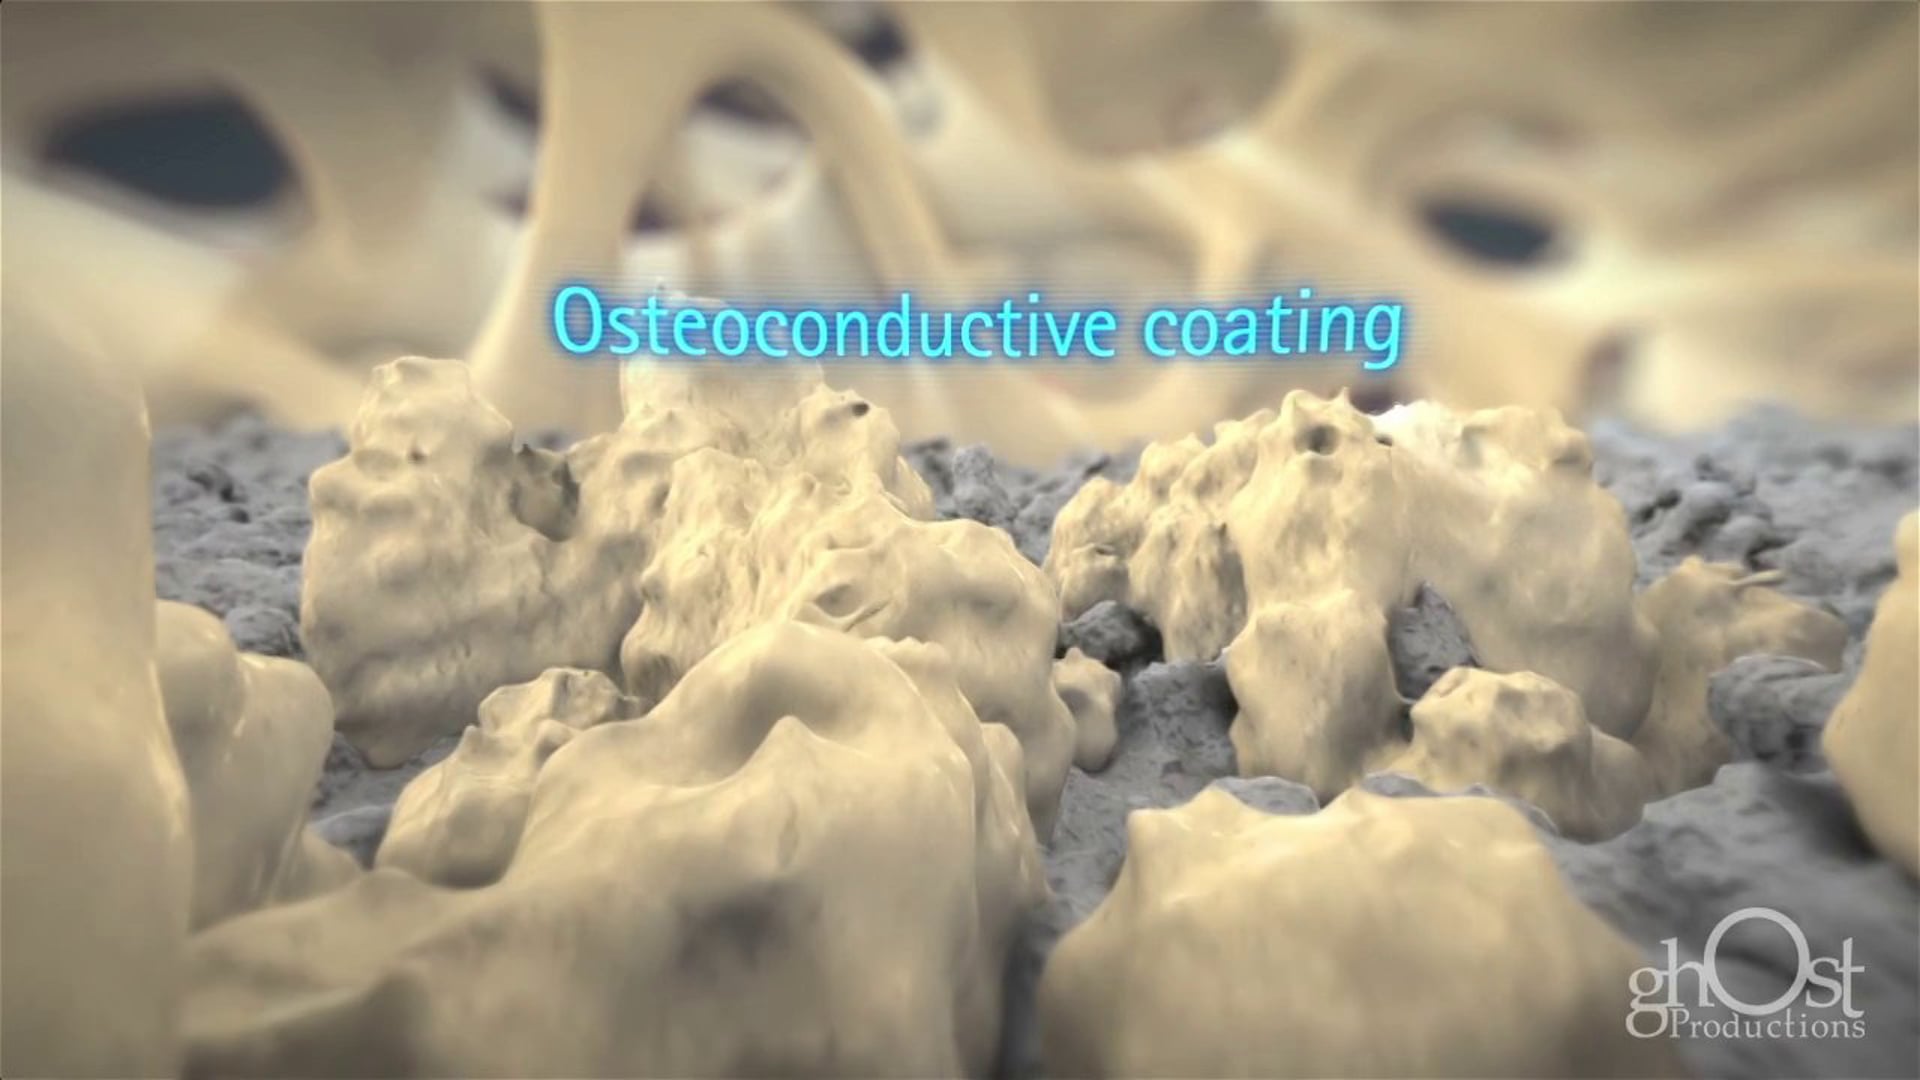 Ghost Productions - Osteoconductive Coating